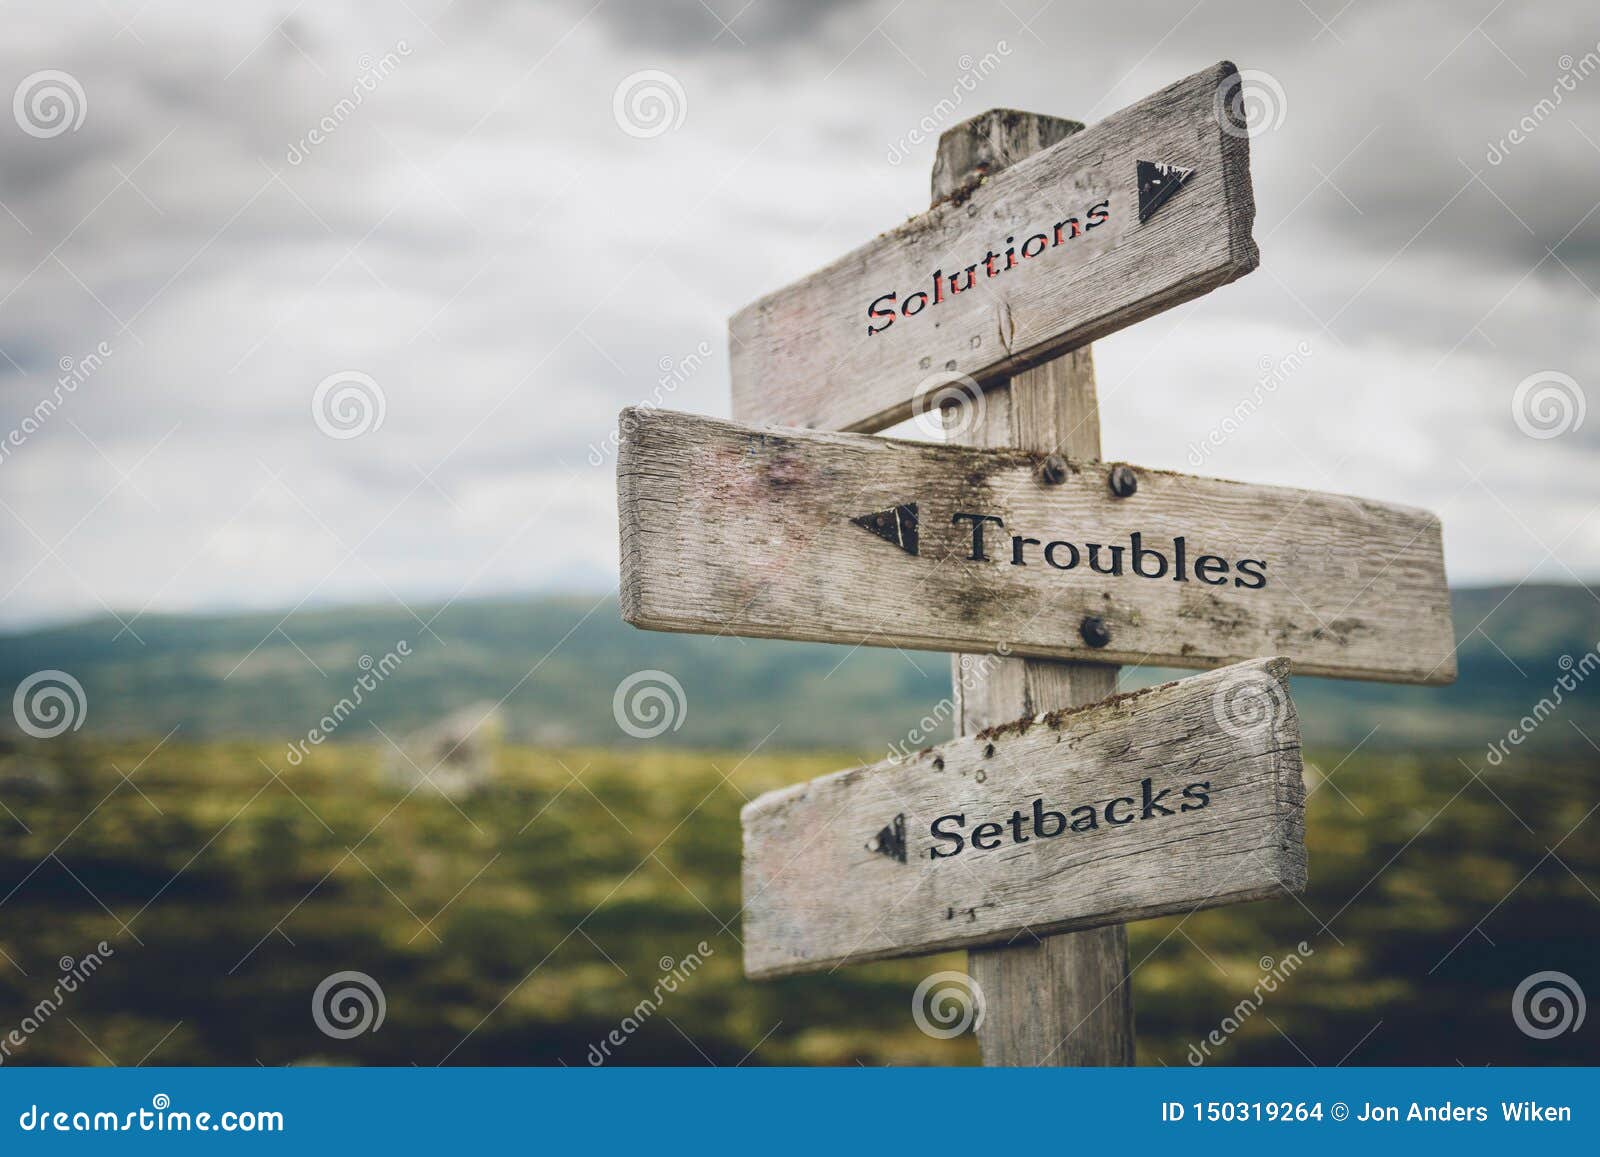 solutions, troubles and setbacks signpost.